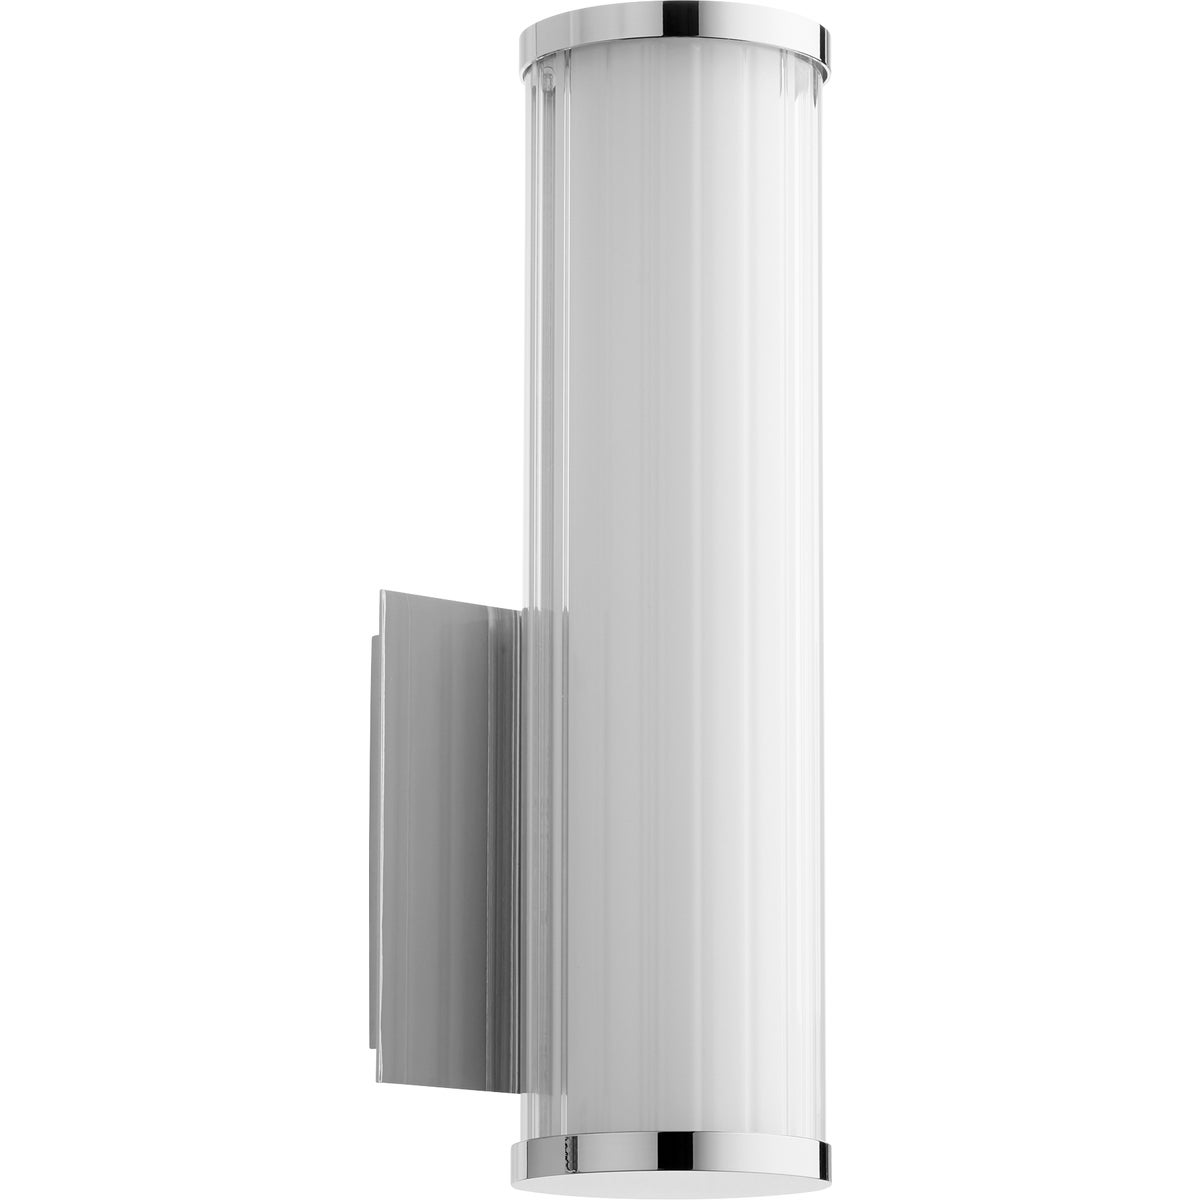 LED Wall Sconce with clean lines, perfect for modern applications. Subtle sophistication in a 5.13"W x 12.5"H x 4"E fixture. 9W, 689 lumens, 3000K color temperature. UL Listed, damp location rated. 2-year warranty.